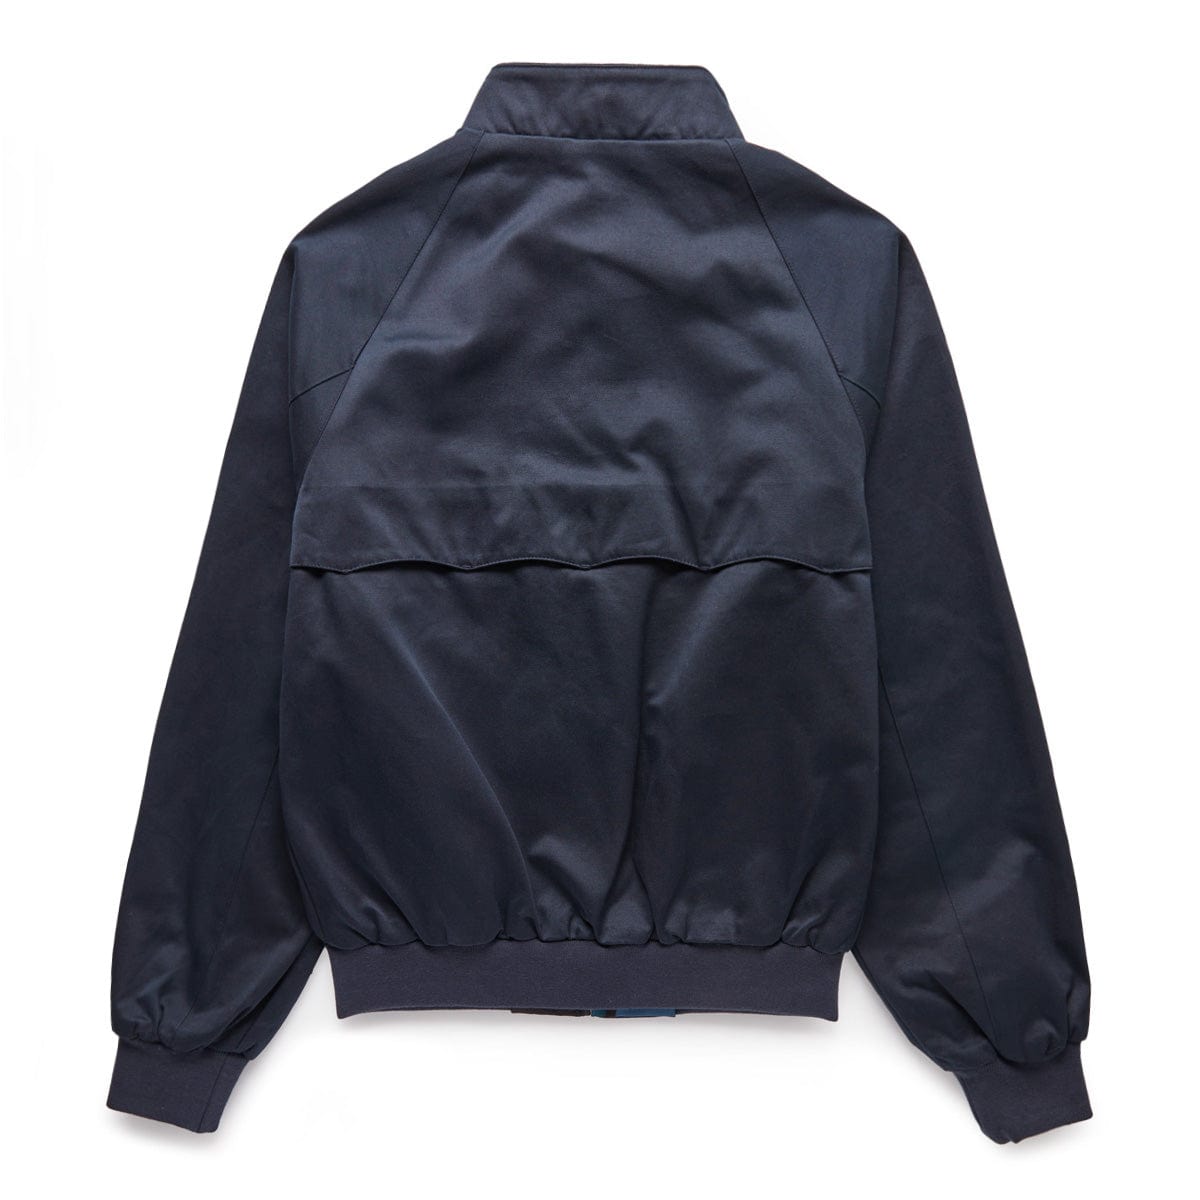 By Parra Outerwear ANXIOUS DOG JACKET